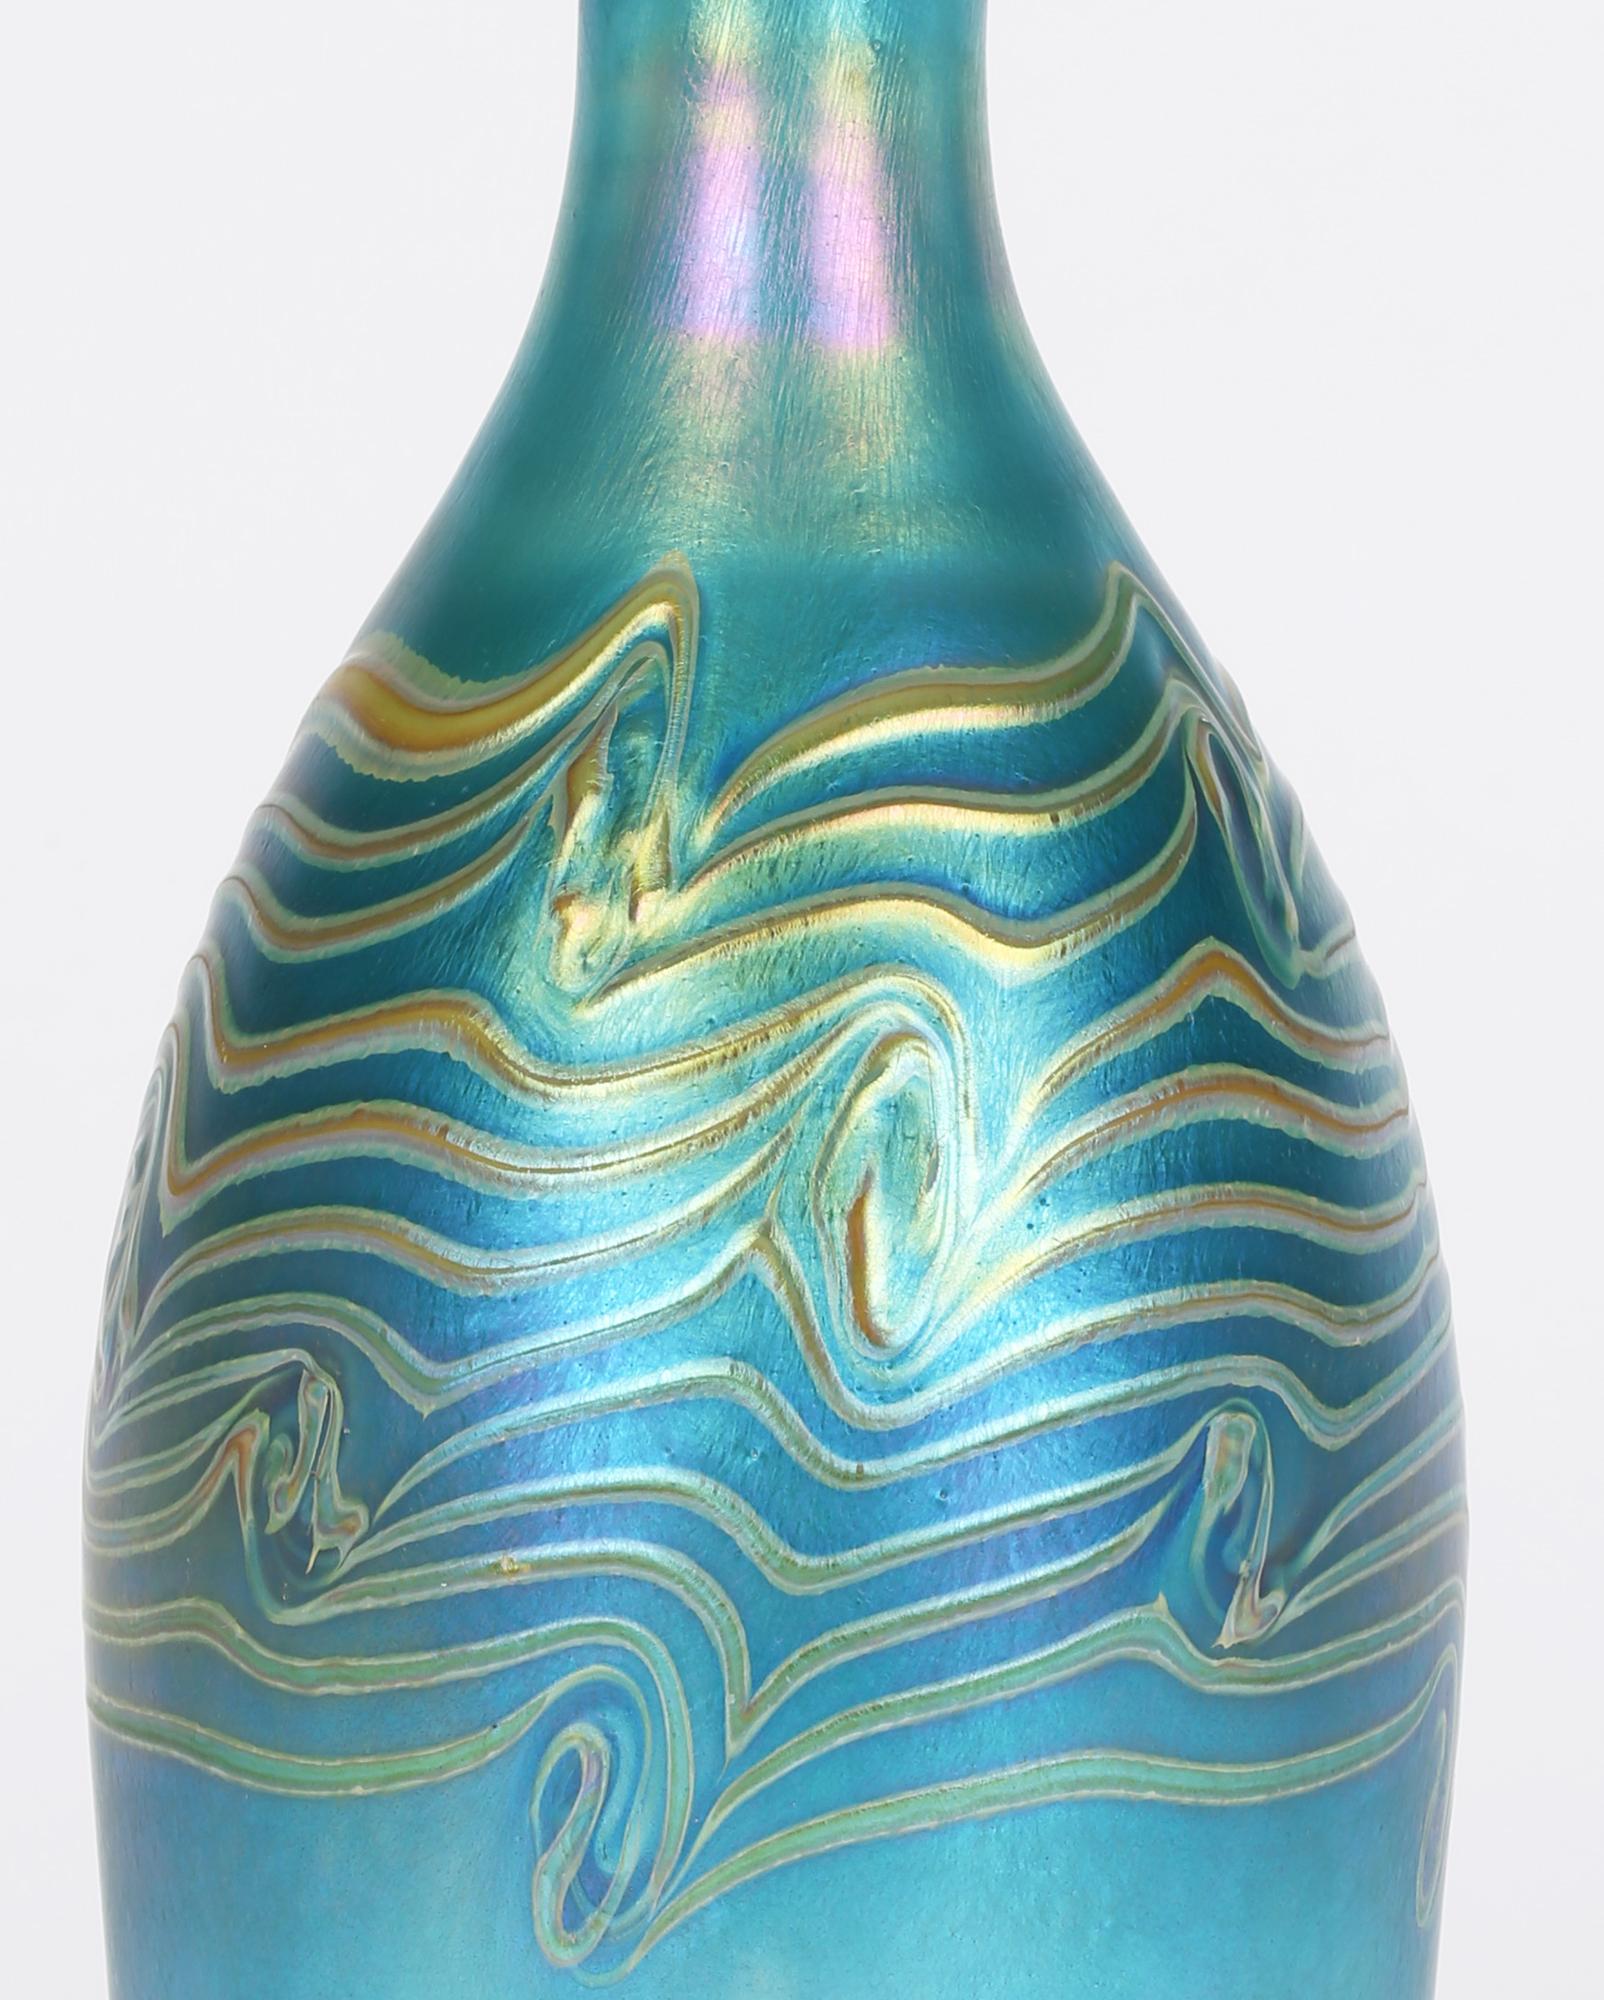 Iridescent Blue Bottle Shaped Art Glass Vase with Peacock Feather Trailing For Sale 1